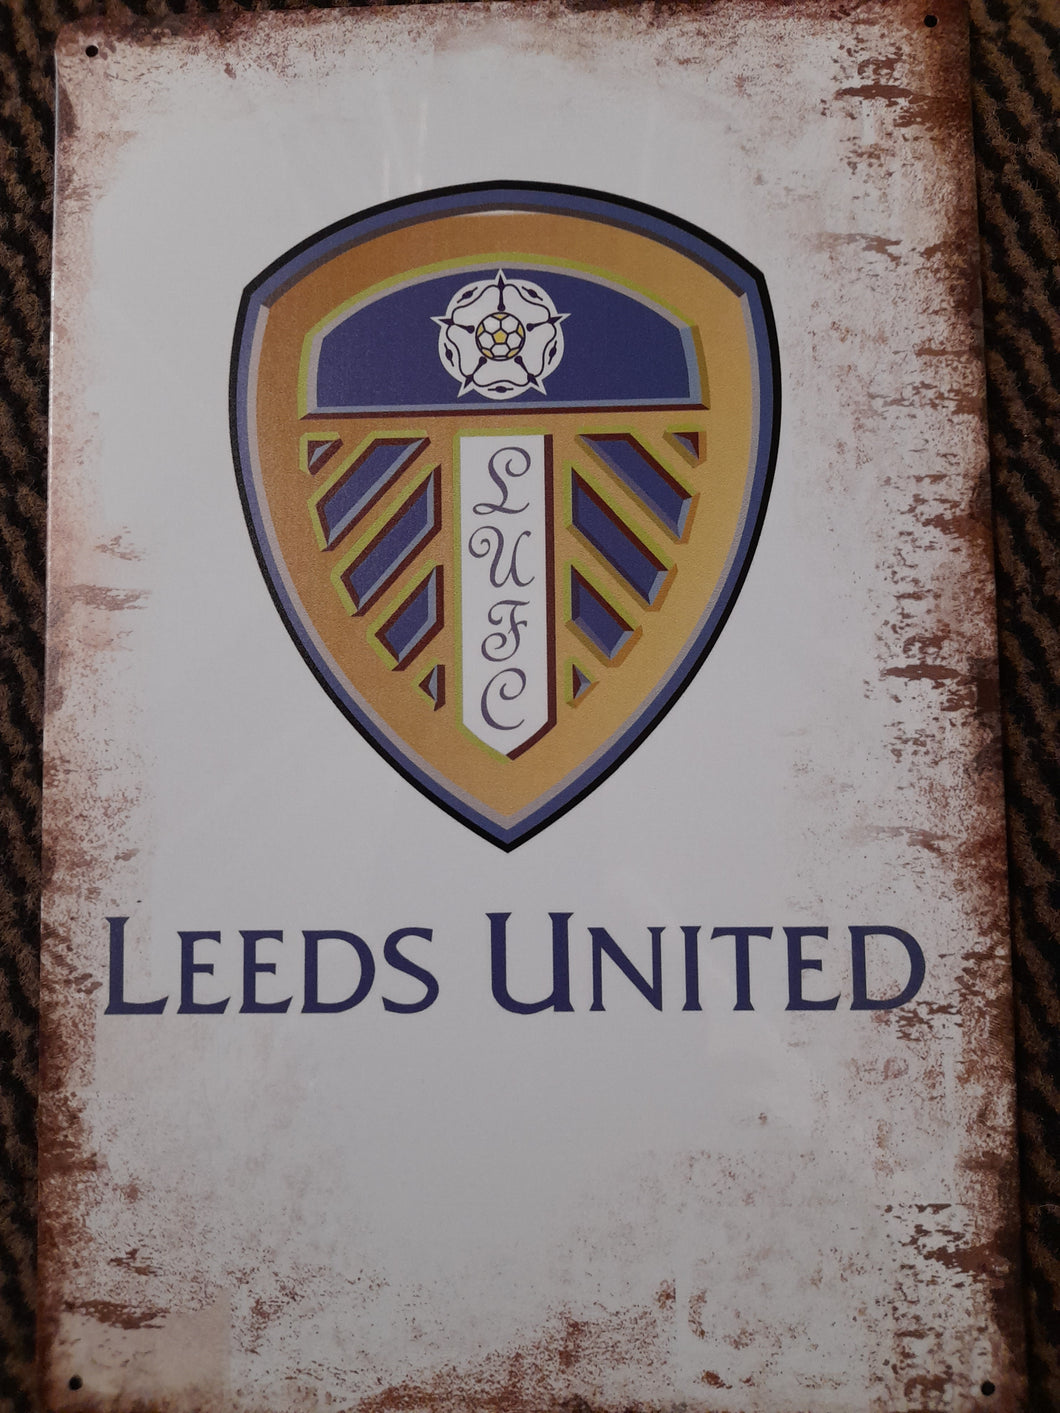 Football clubs vintage style metal signs 30cm x 20cm